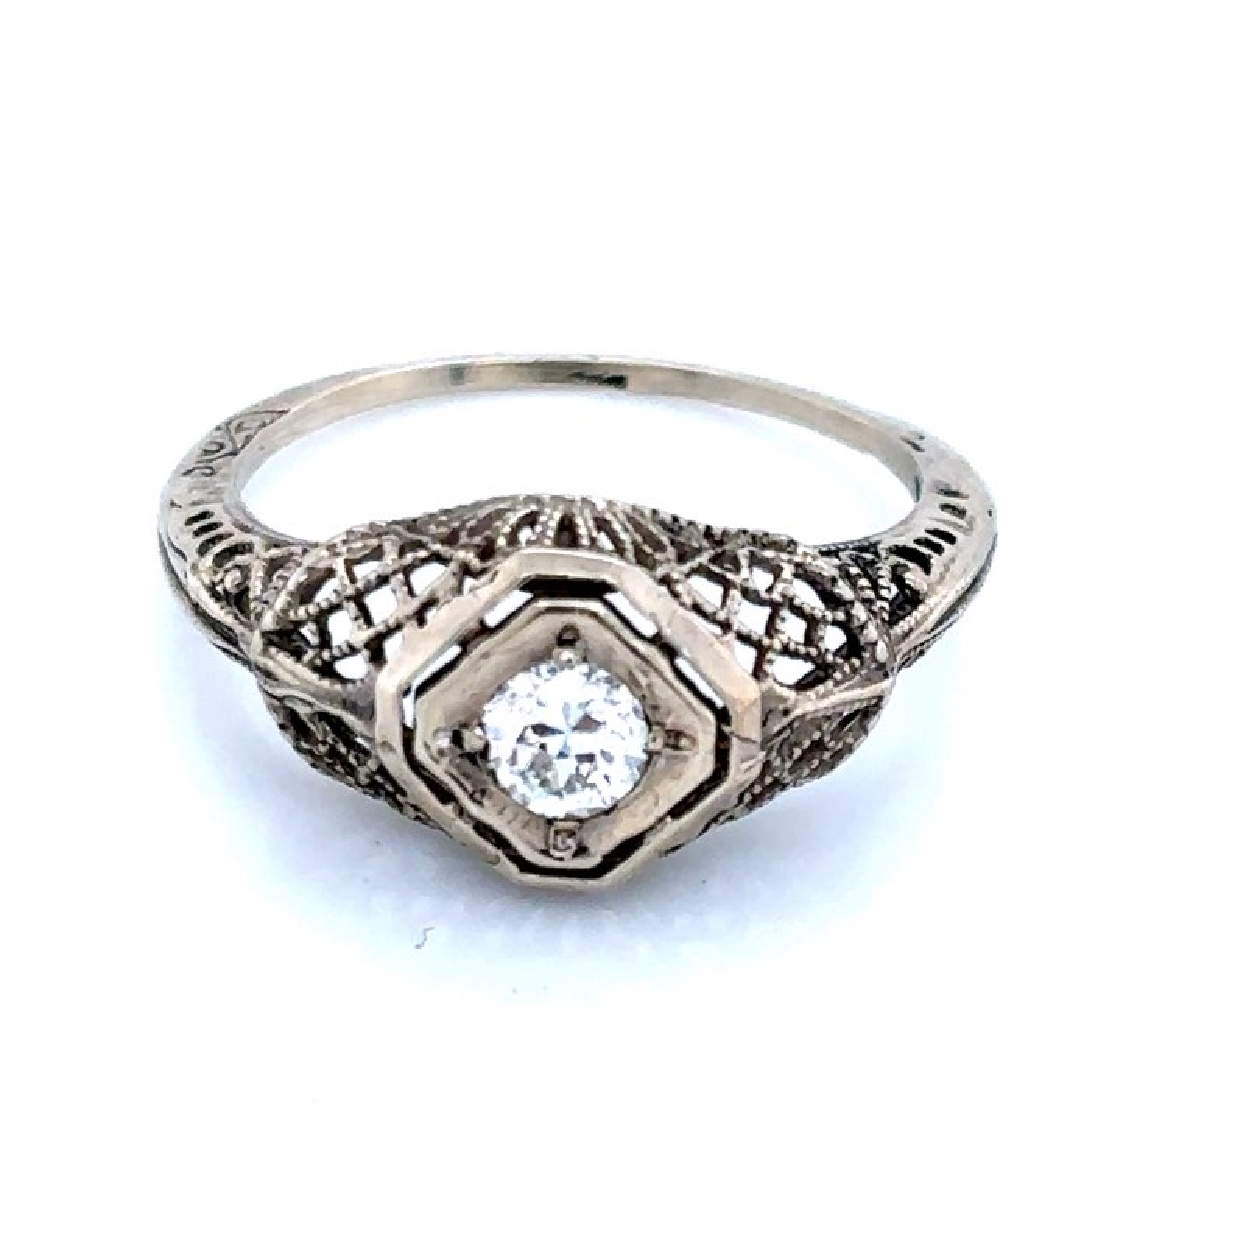 14K White Gold Victorian Filigree Setting with .15ct Old European Cut Diamond 

Size 5